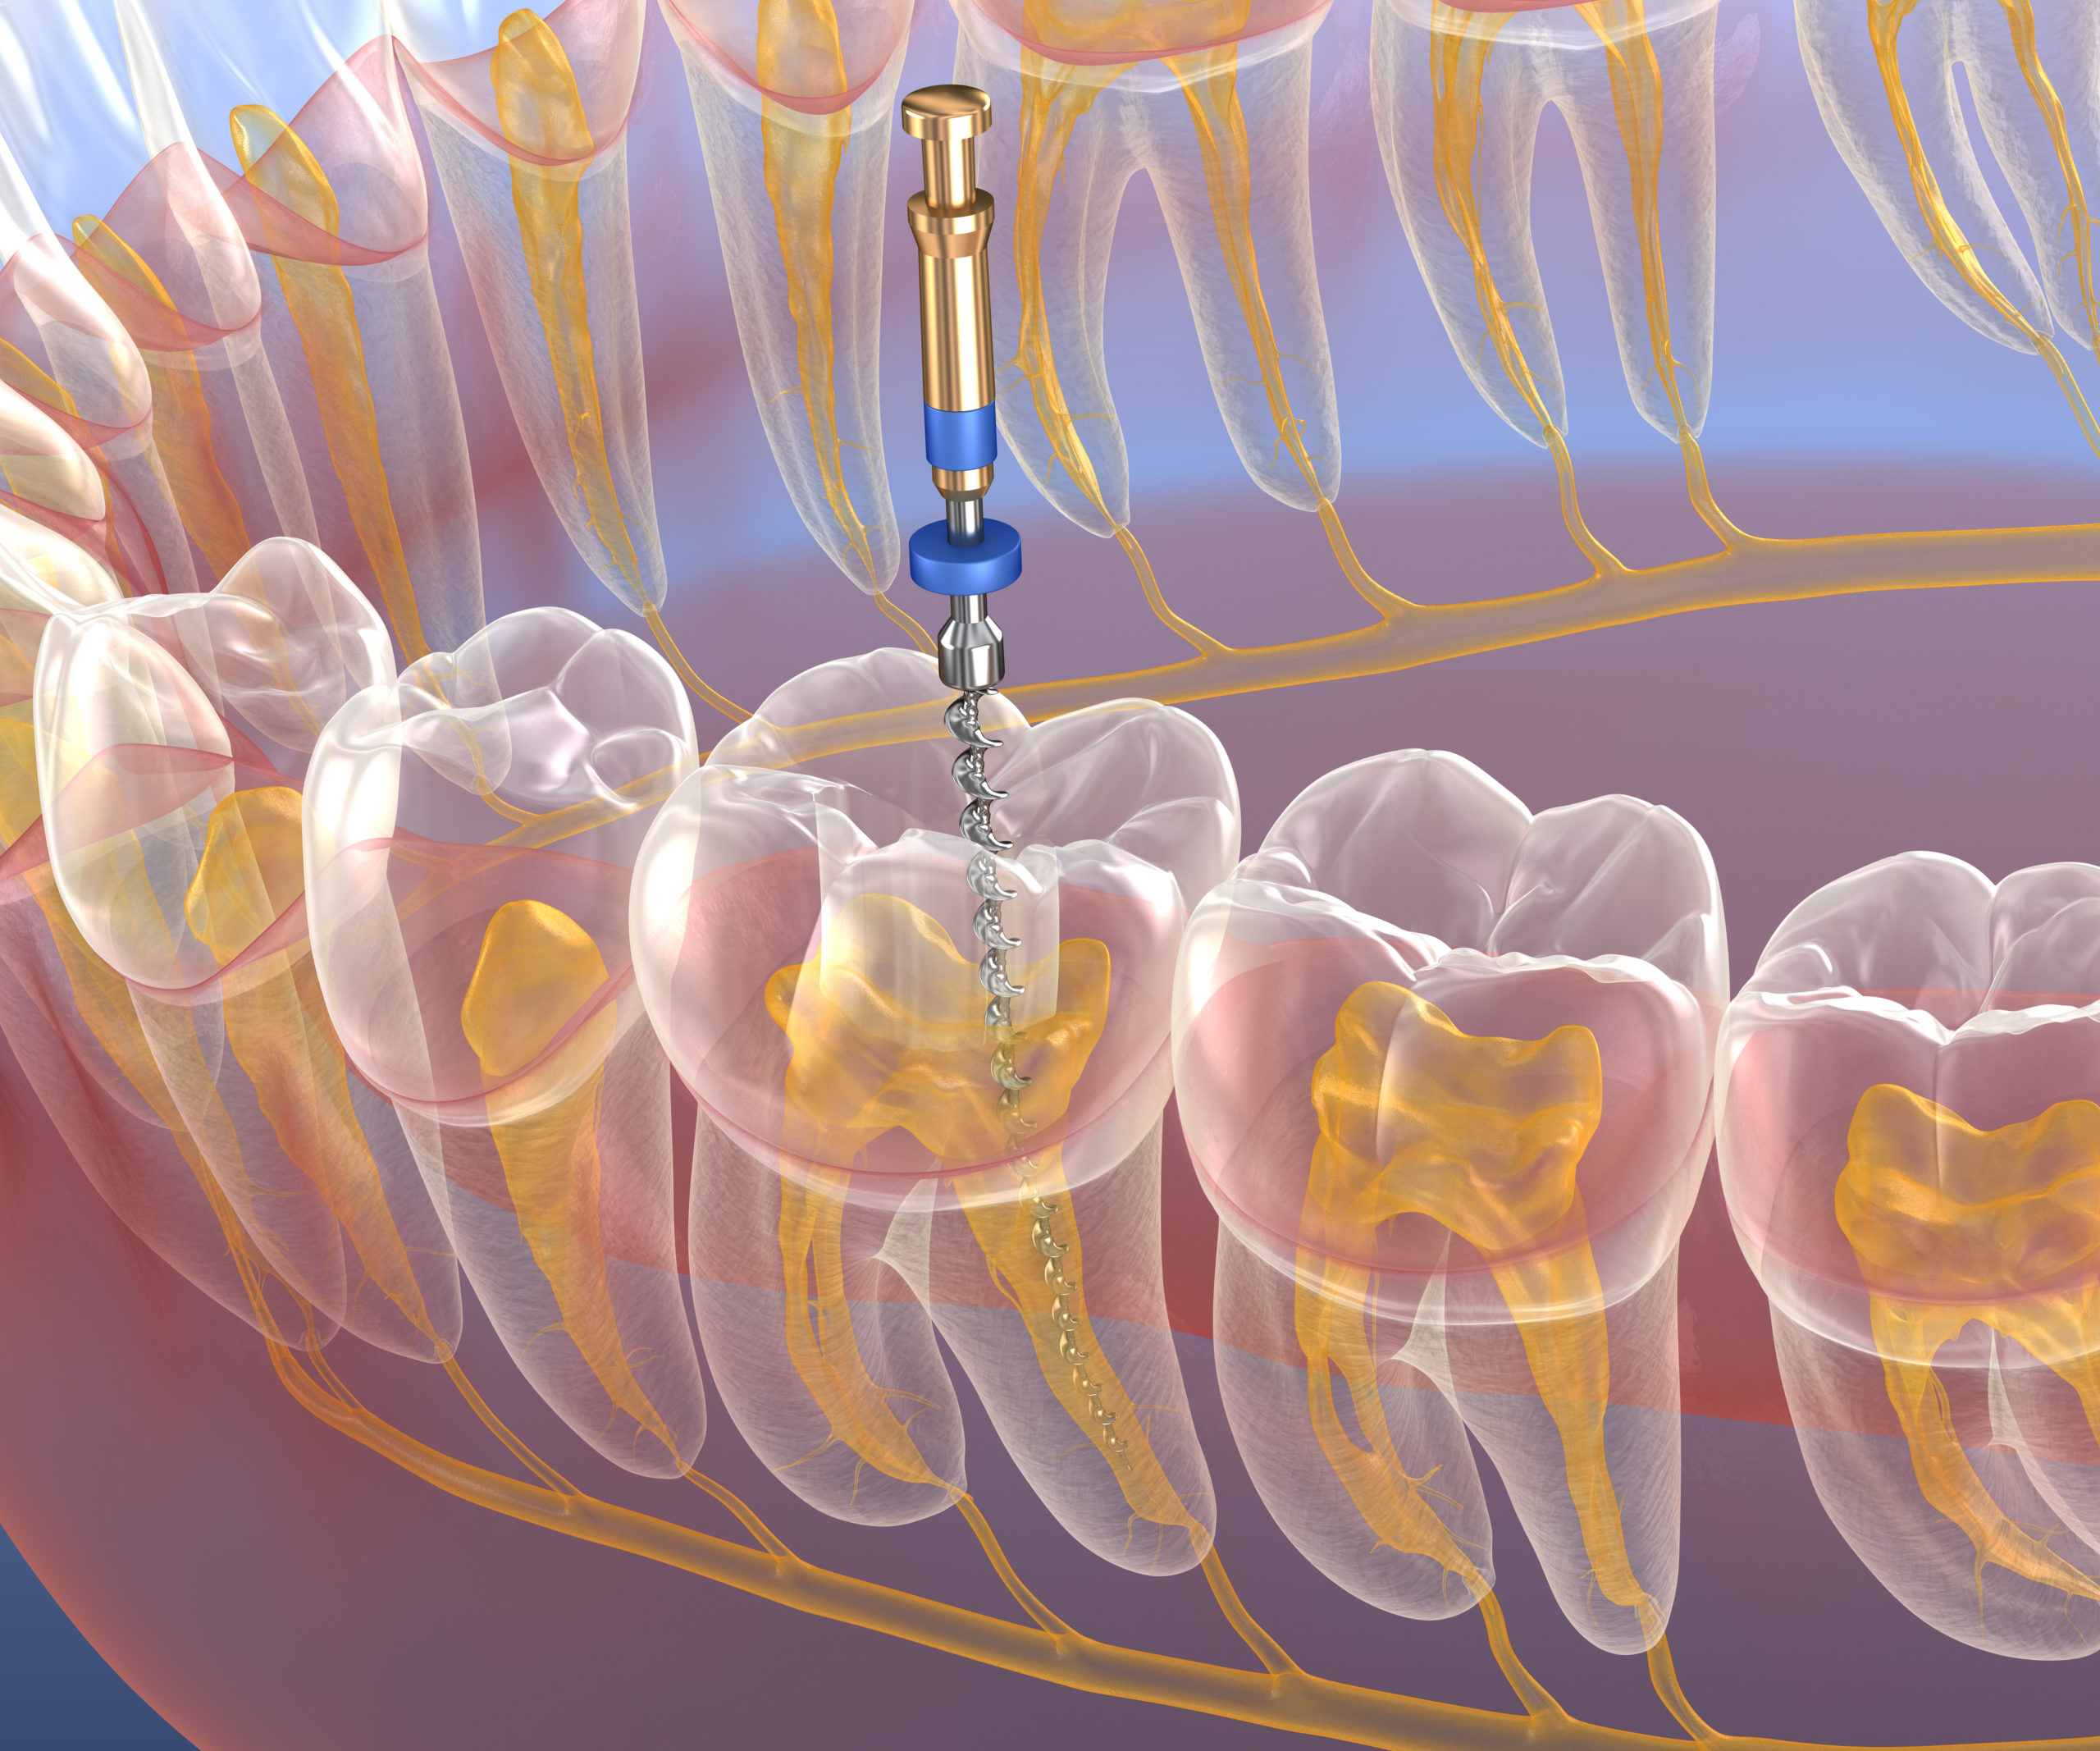 Endodontic Root Canal Treatment Process Medically Accurate Tooth D Illustration Lvi Global